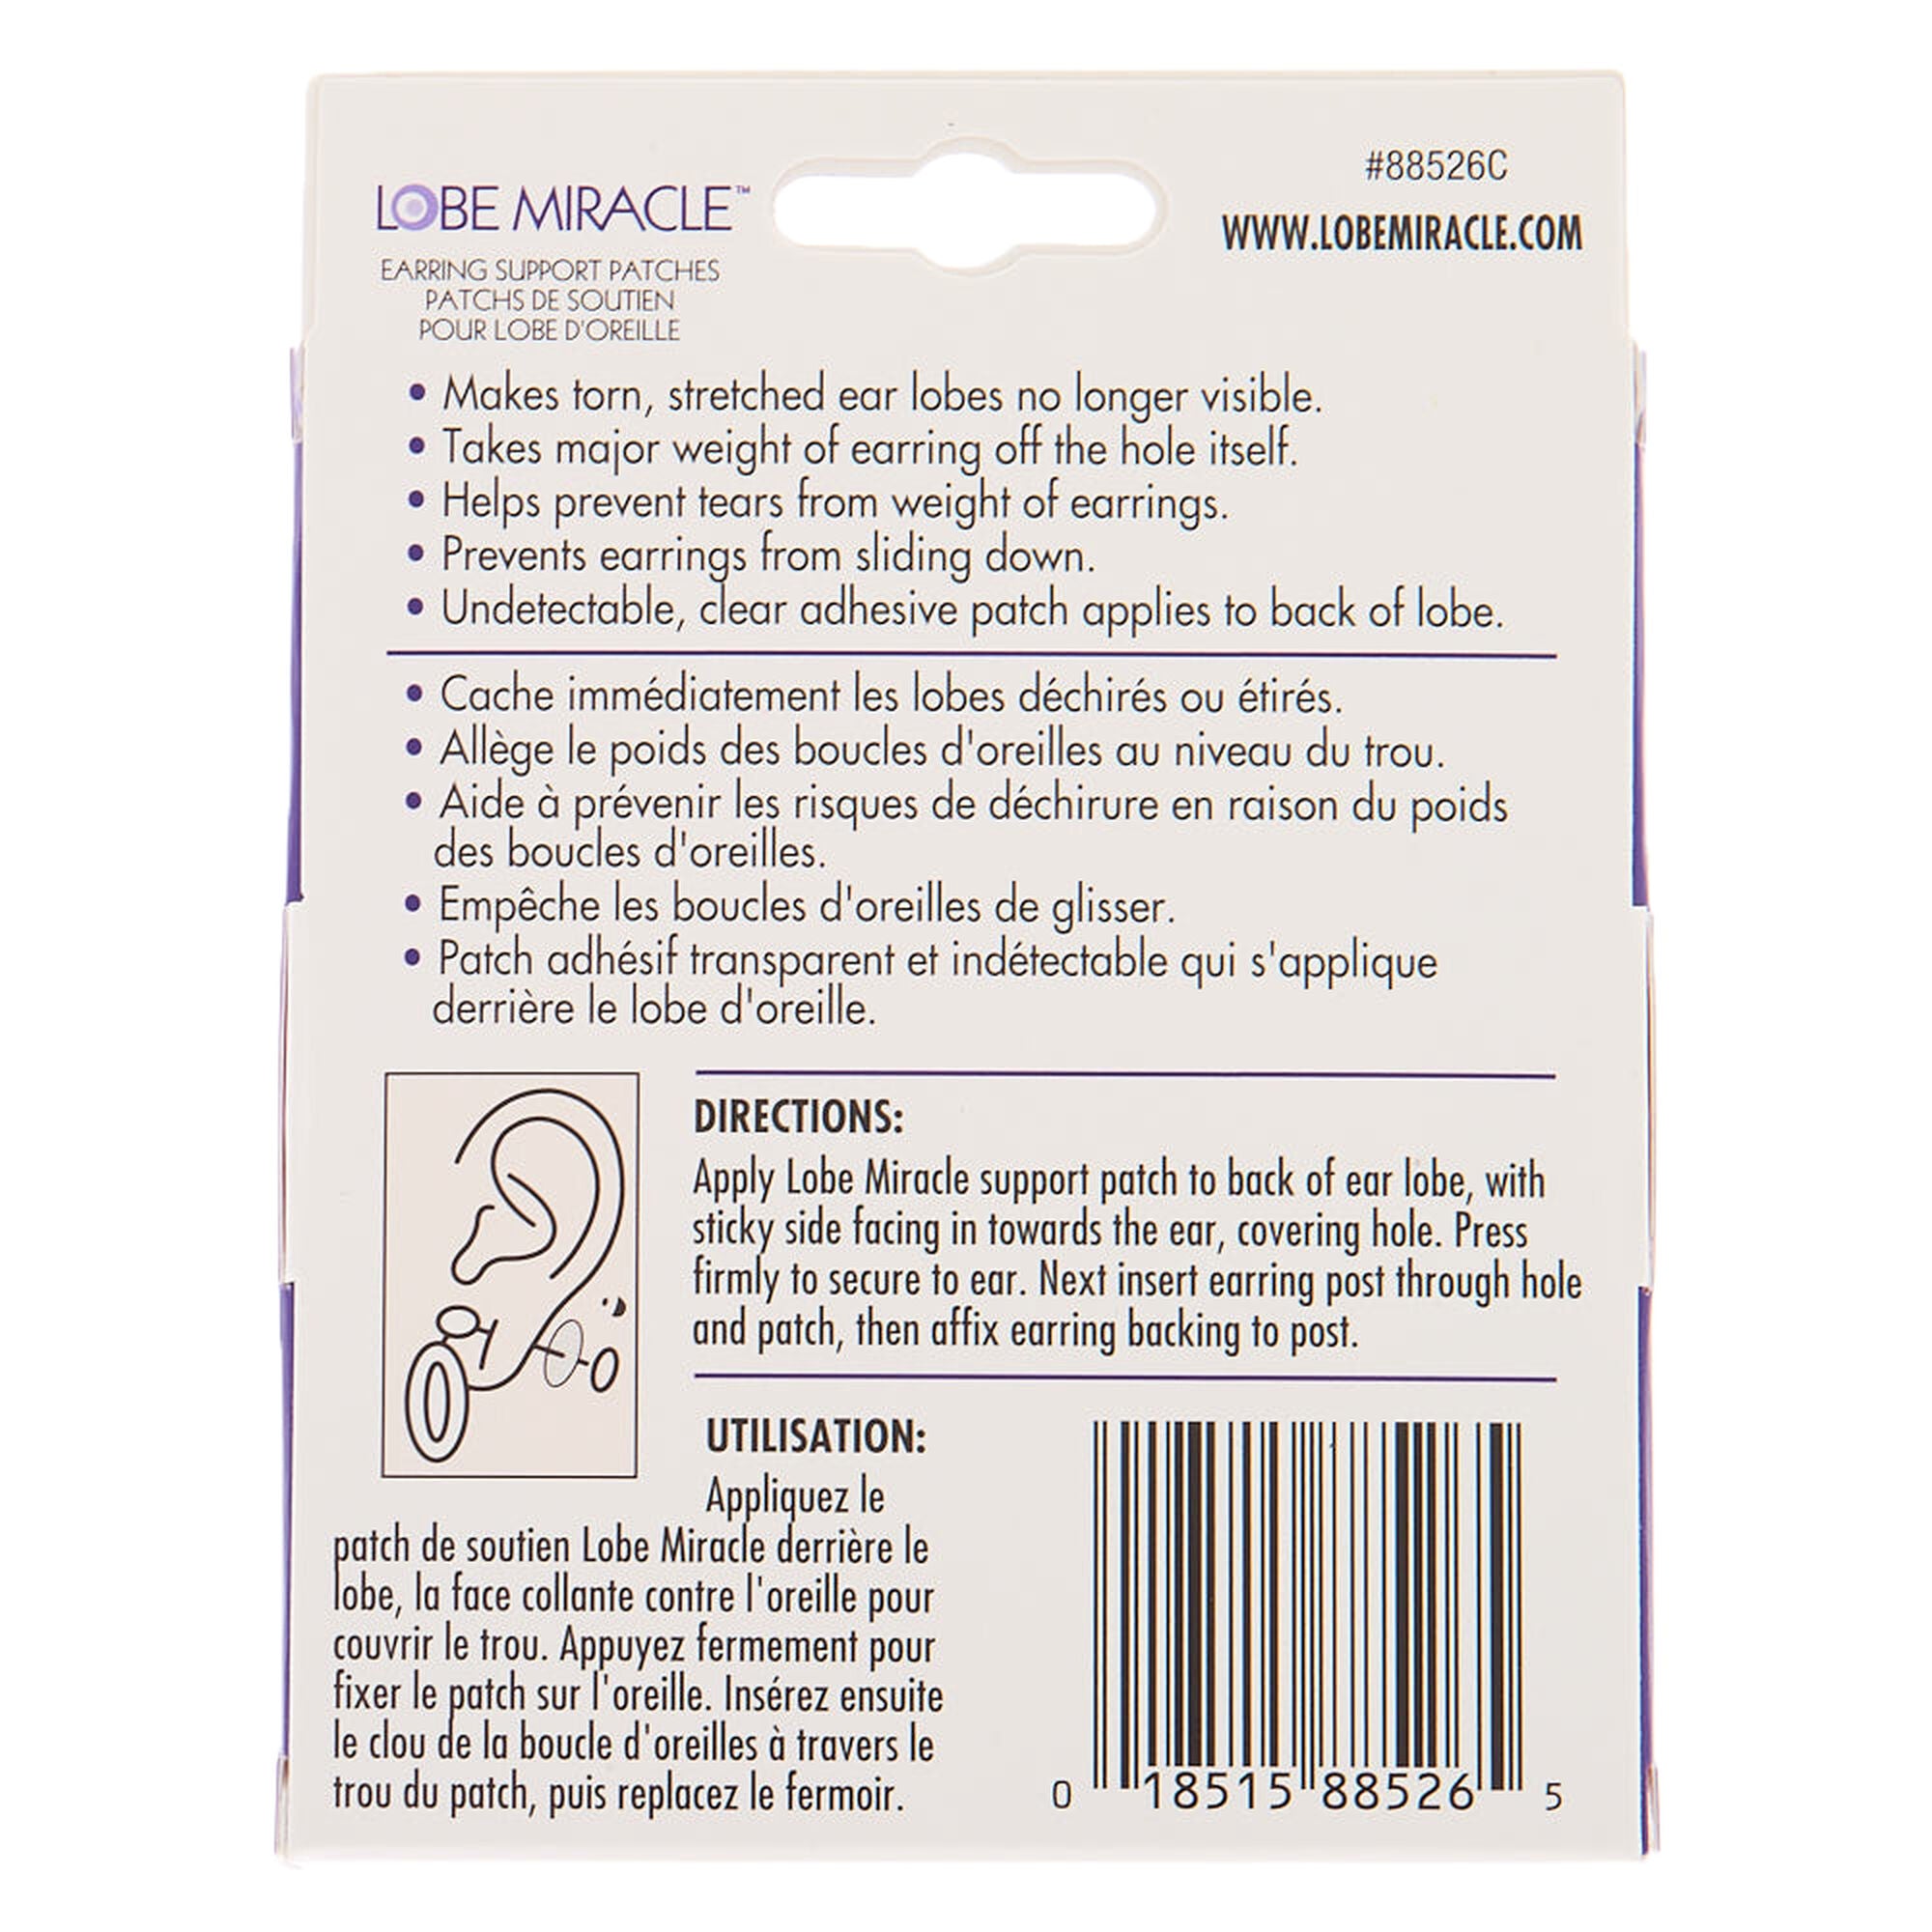 2 Pack Lobe Miracle Earing Support Patches 60 Patches